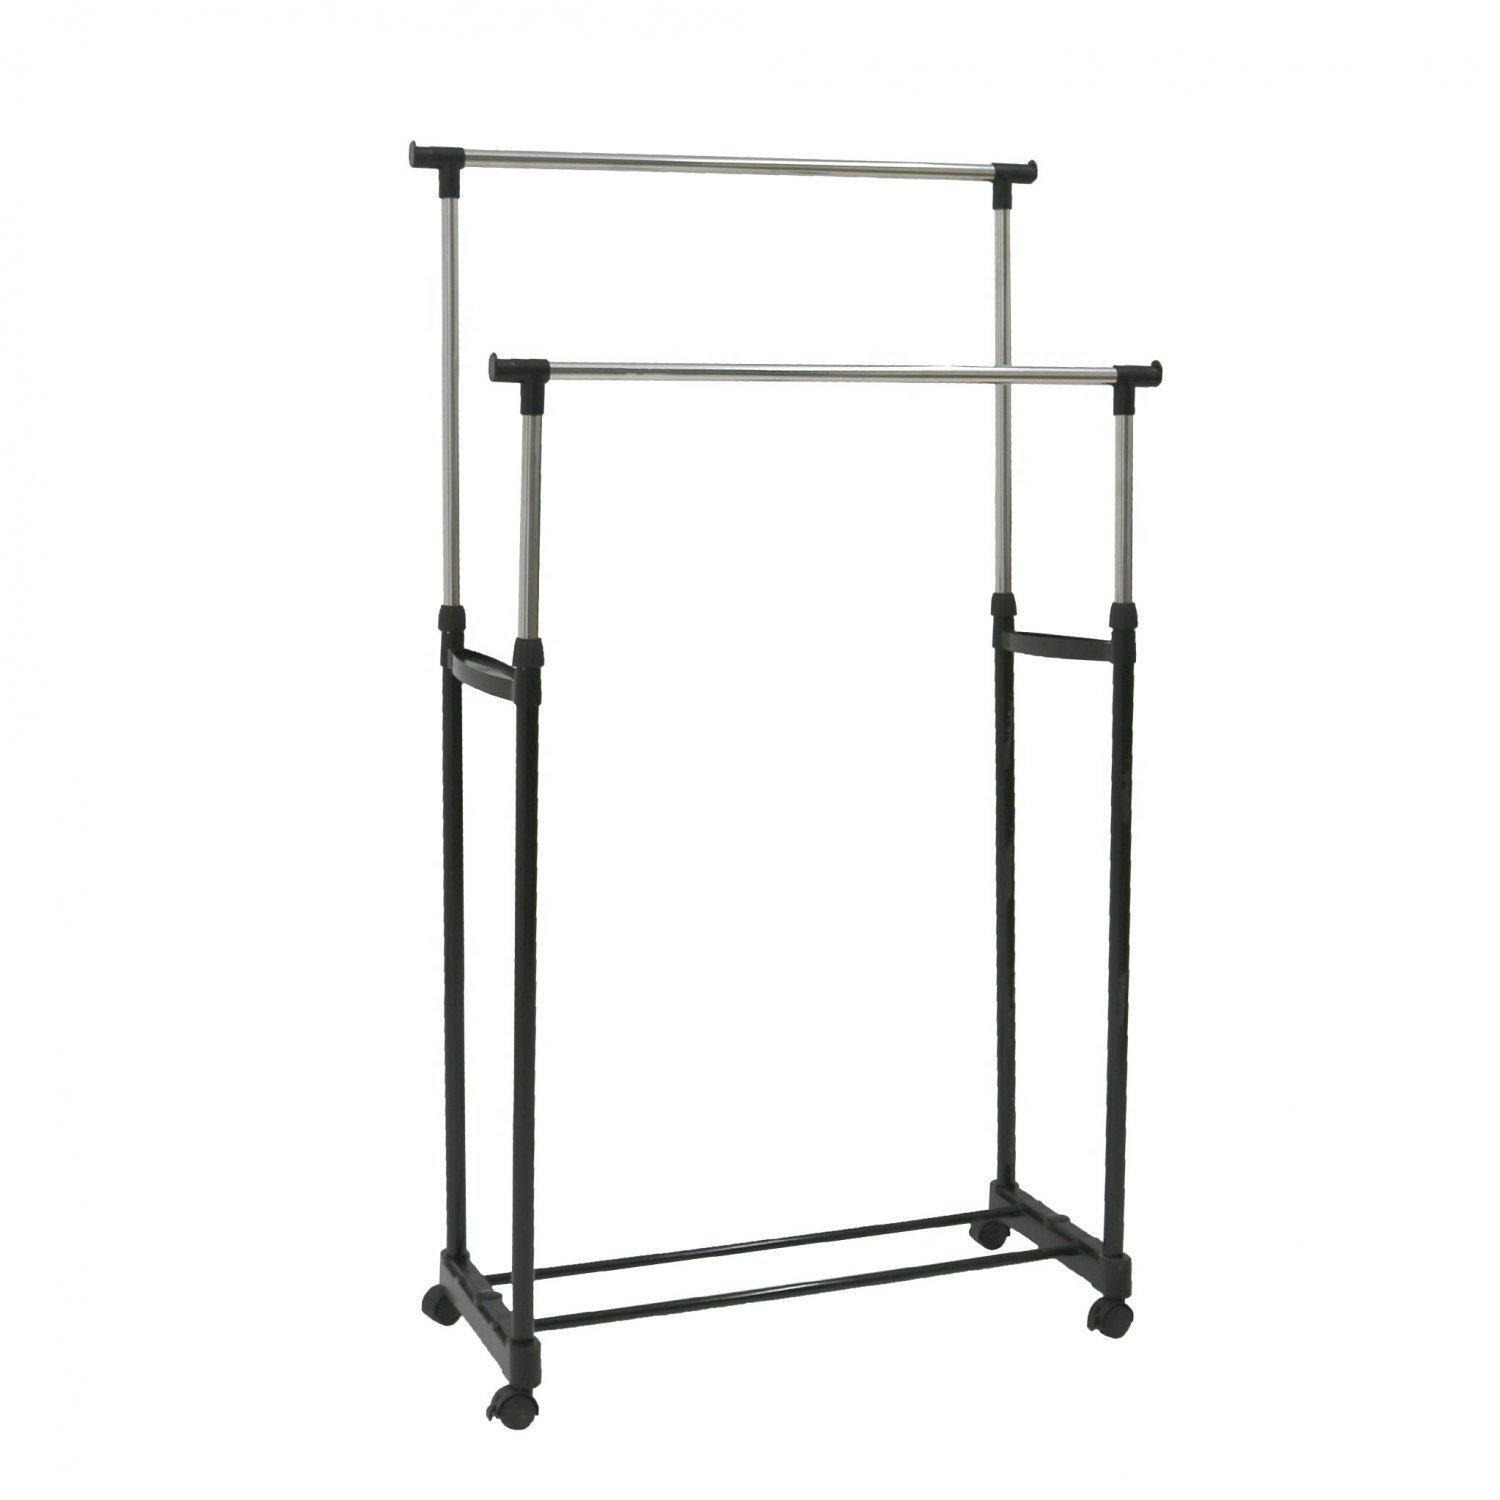 Adjustable Double Mobile Garment Clothes Rail With Wheels - image 1